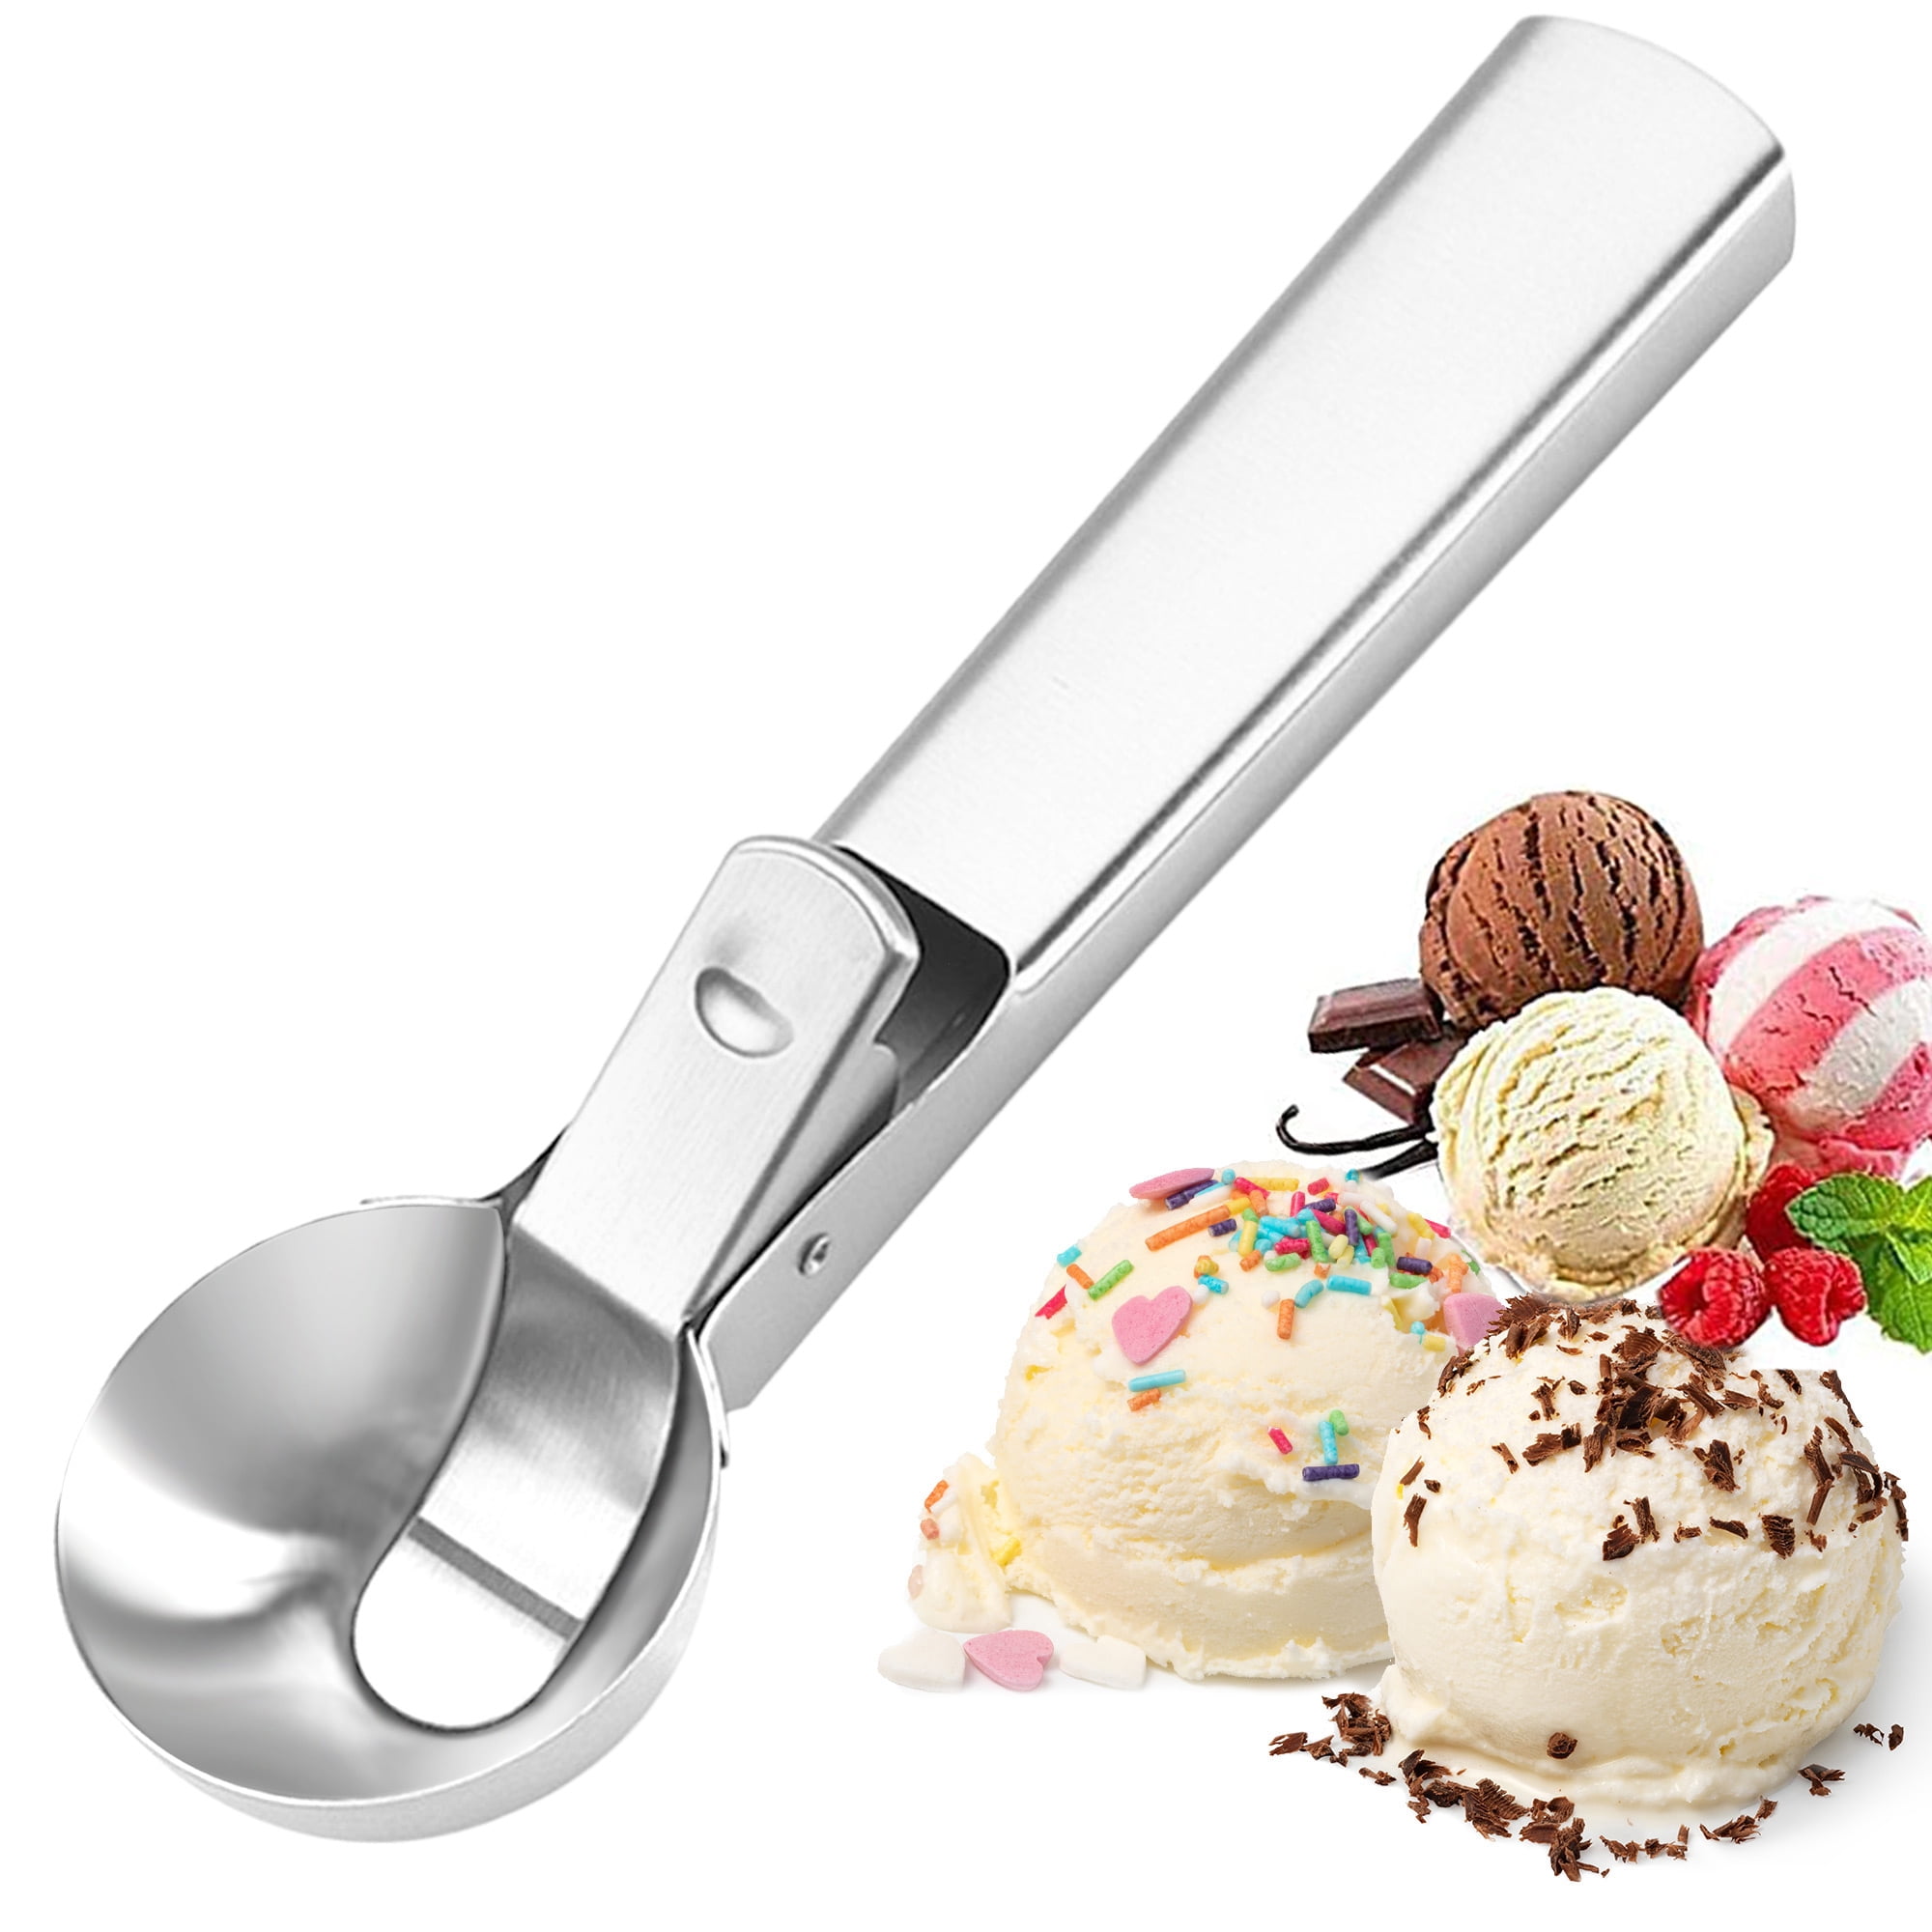 Melon Ballers Stainless Steel, Ice Cream Scoop, Cookie Scoops For Baking,  Stainless Steel Cookie Scooper For Baking, Ice Cream Scooper With Trigger  Release, Cookie Dough Scoop With Non-slip Grip, Kitchen Tools, Kitchen